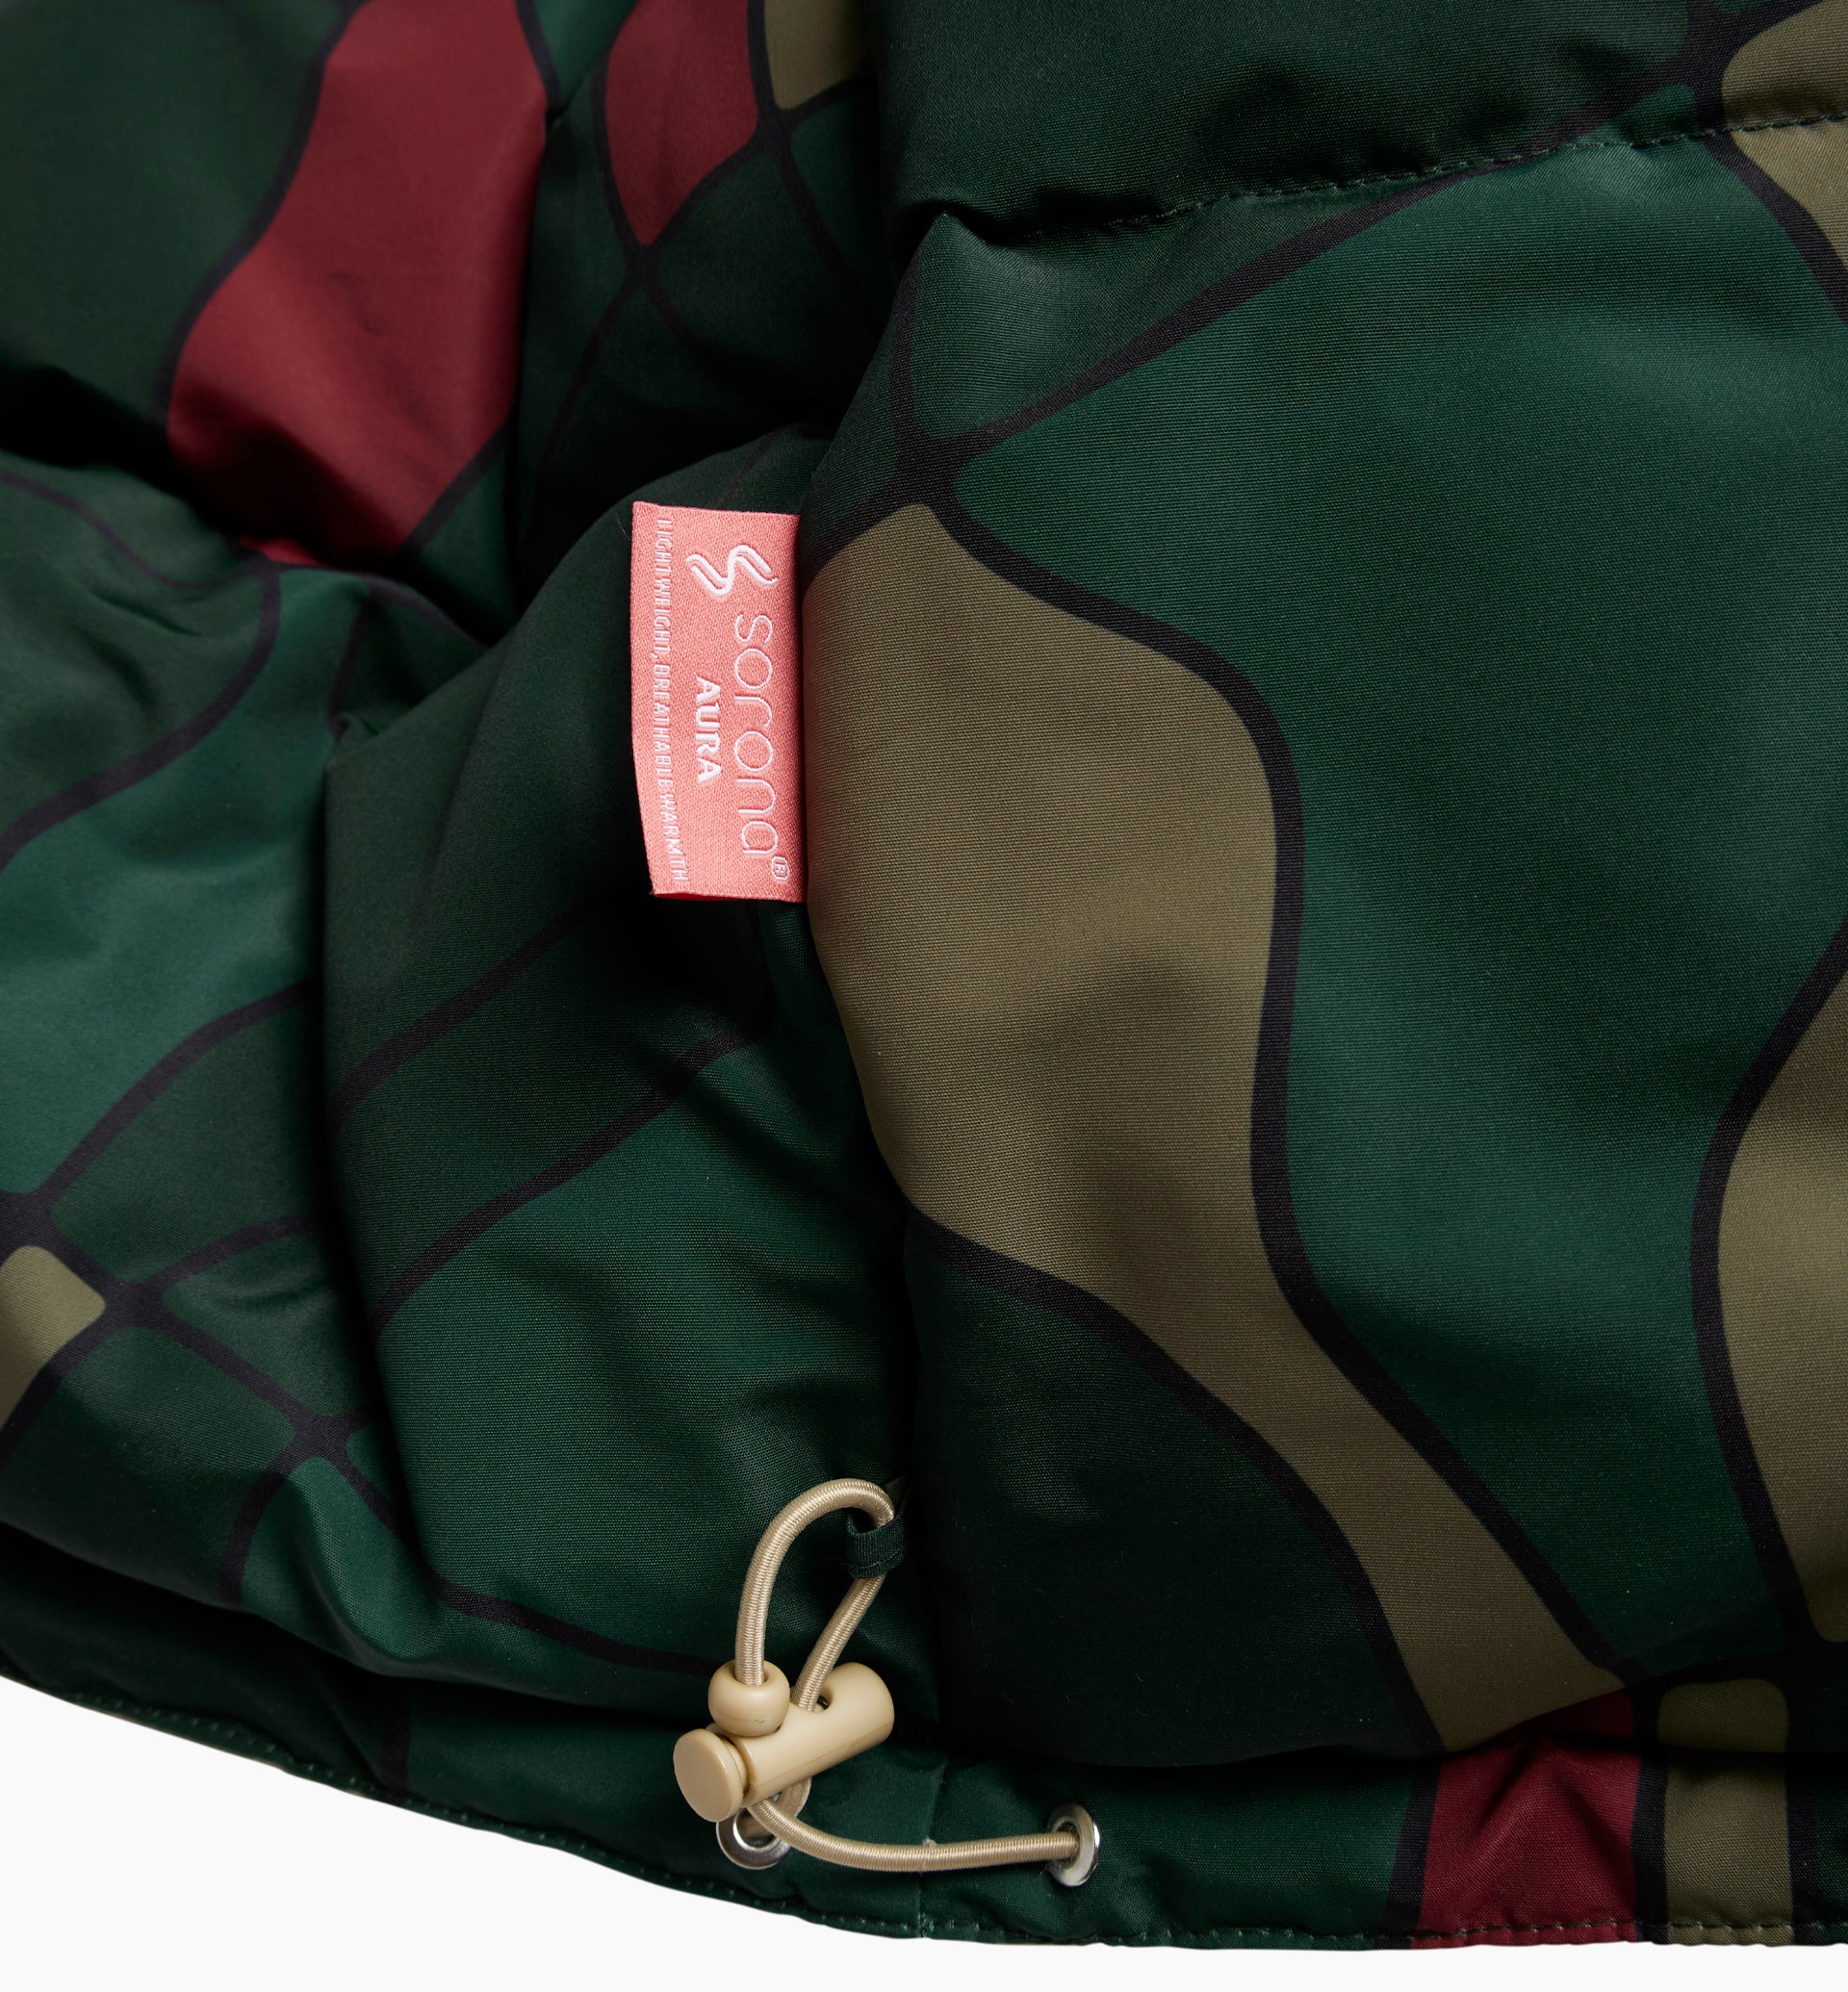 Parra - trees in wind puffer jacket